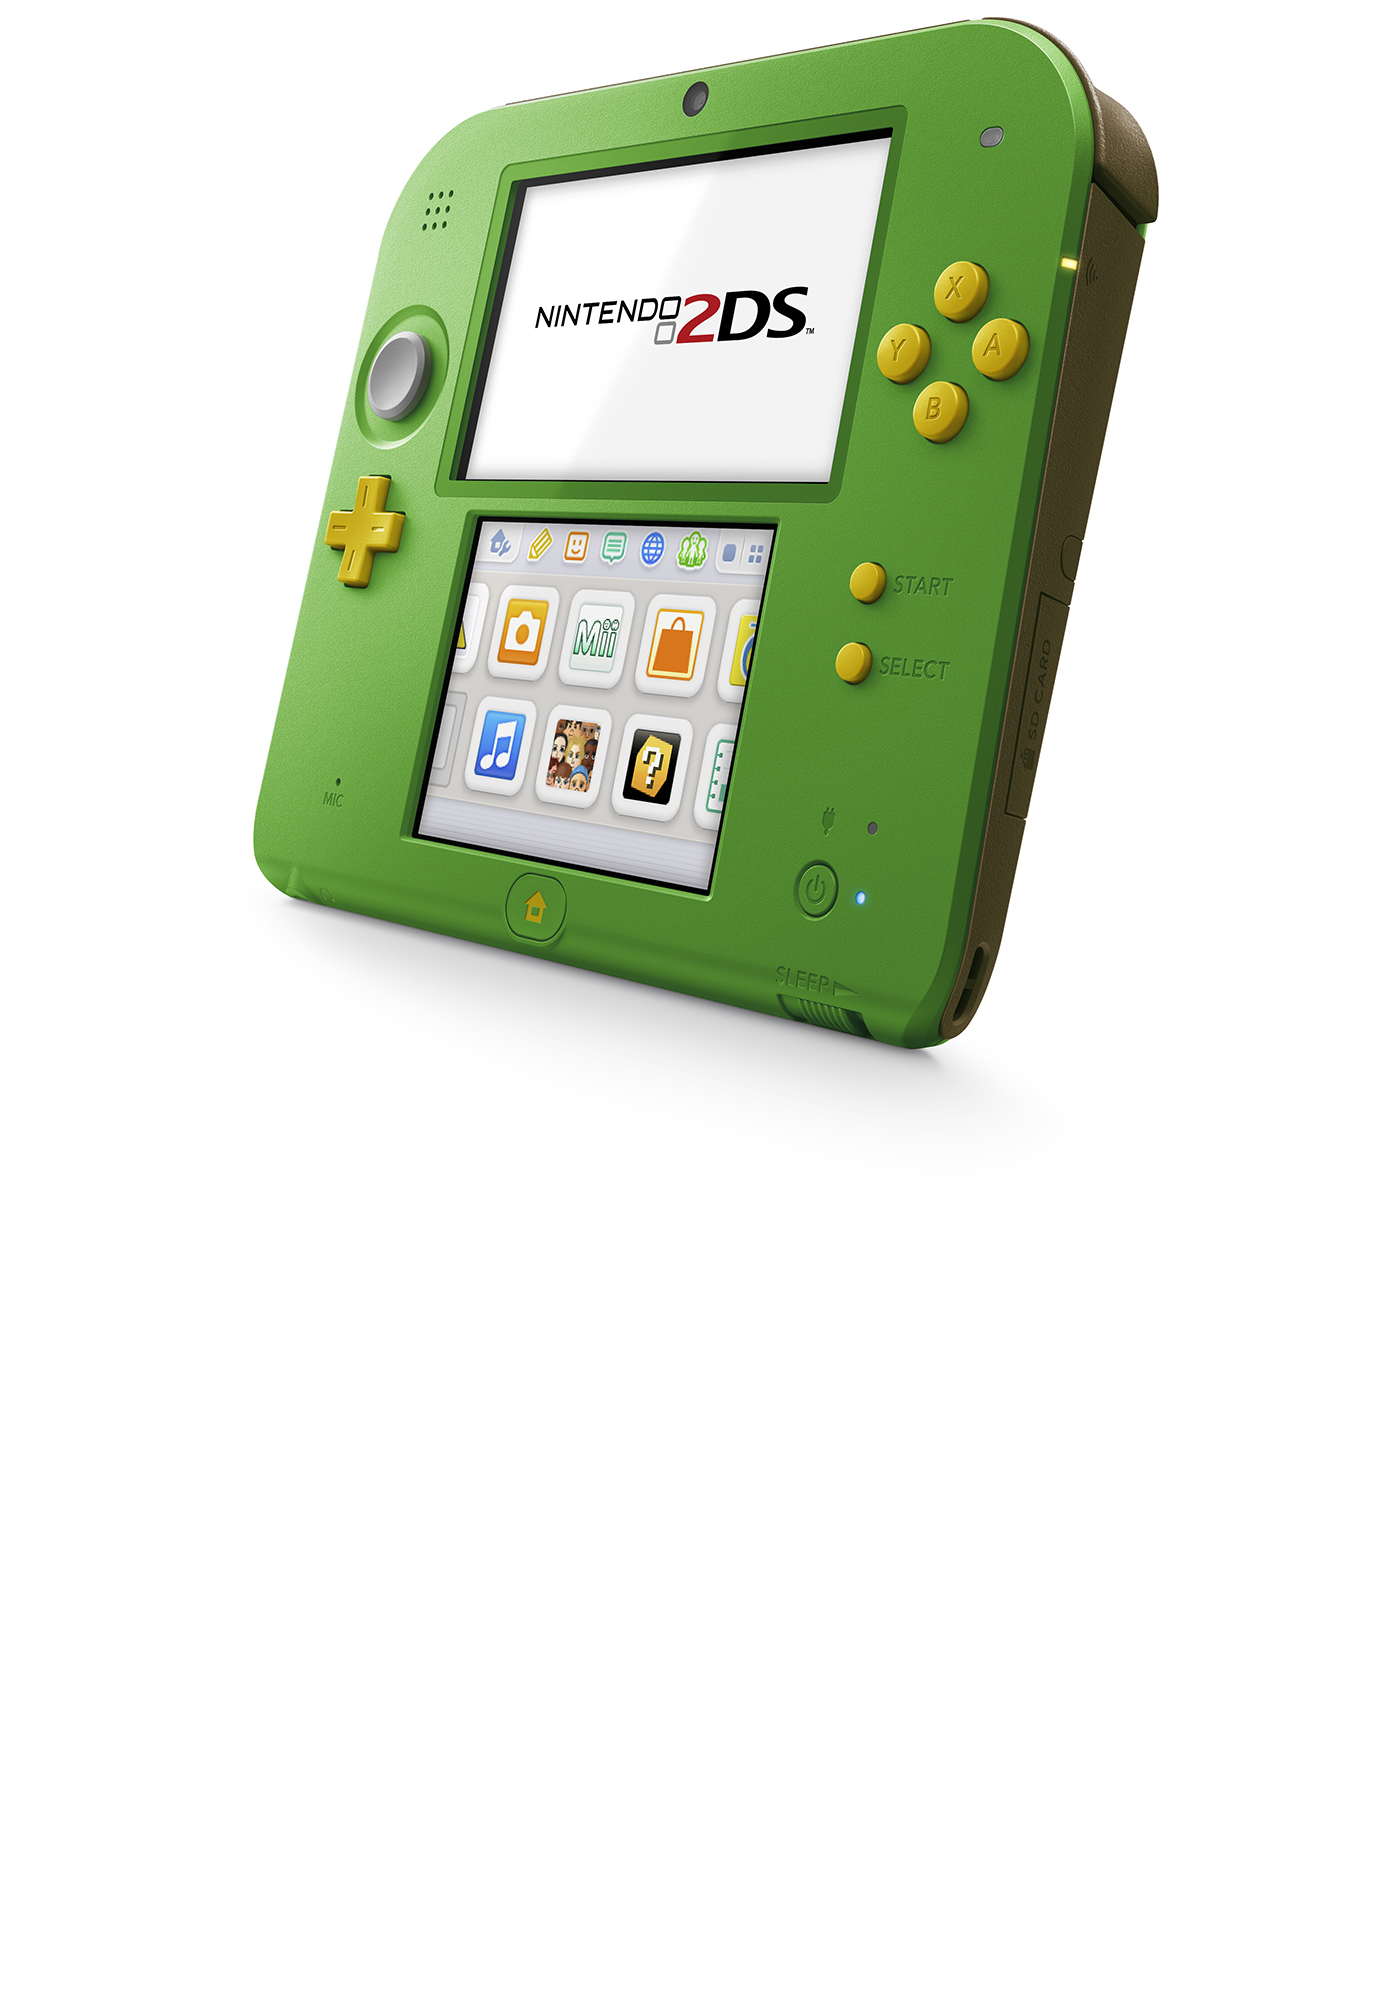 Nintendo 2DS System with The Legend of Zelda: Ocarina of Time 3D - image 4 of 6